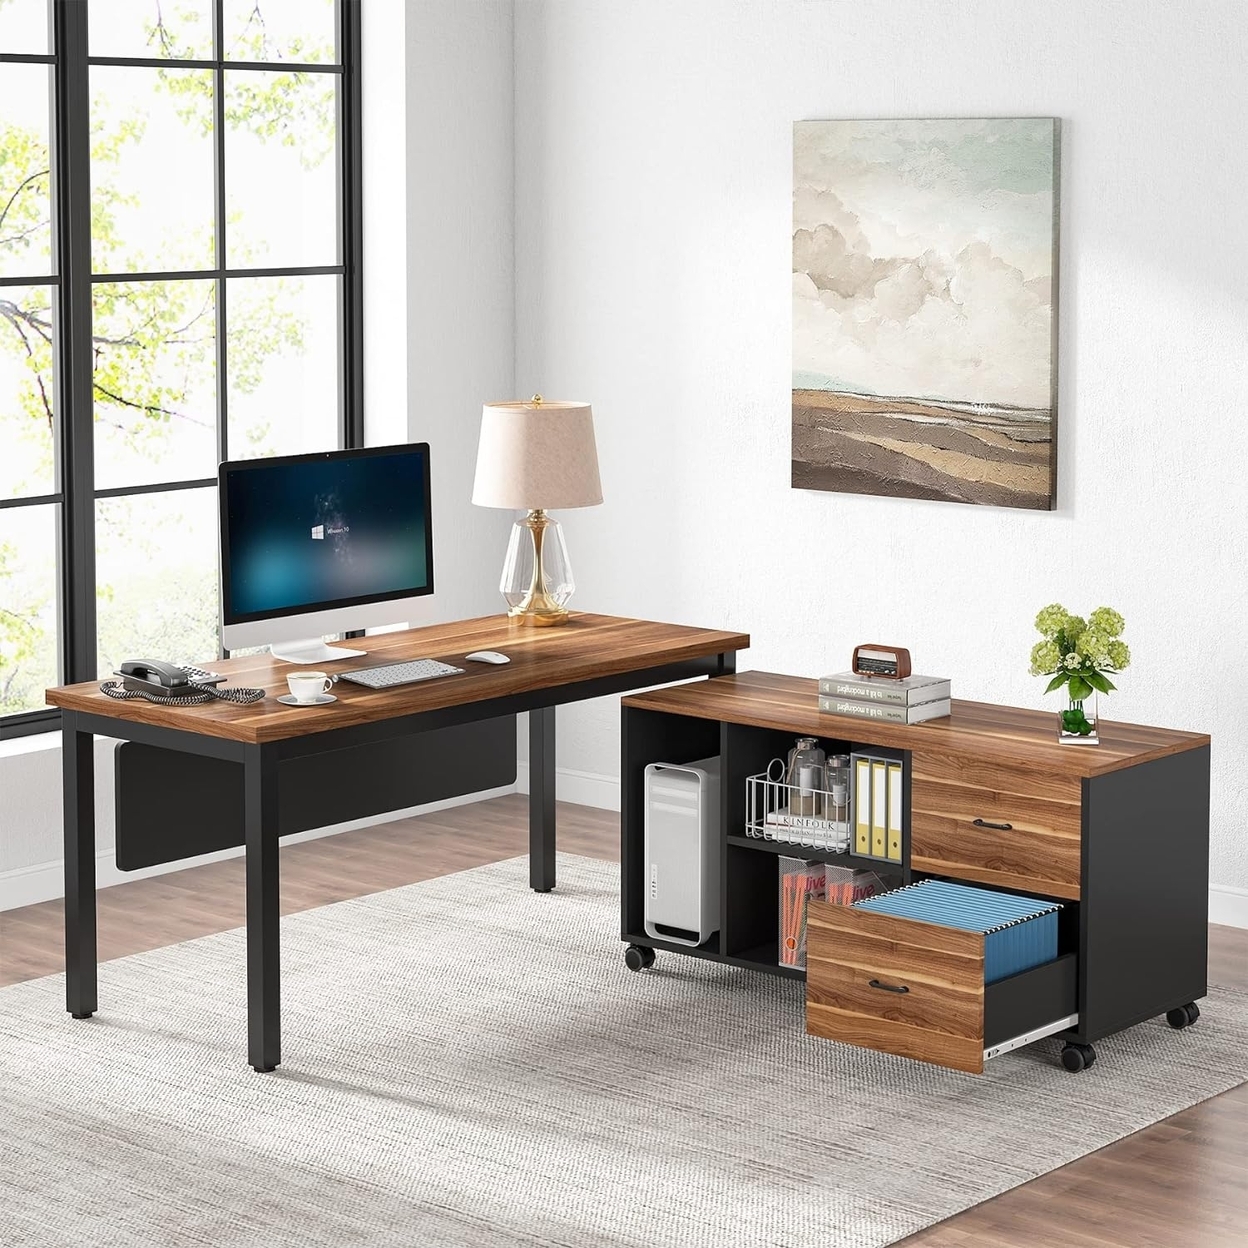 Tribesigns 55 Executive Desk With File Cabinet, L Shaped Computer Desk With 2 Drawers, Industrial Office Desk Business Furniture Sets